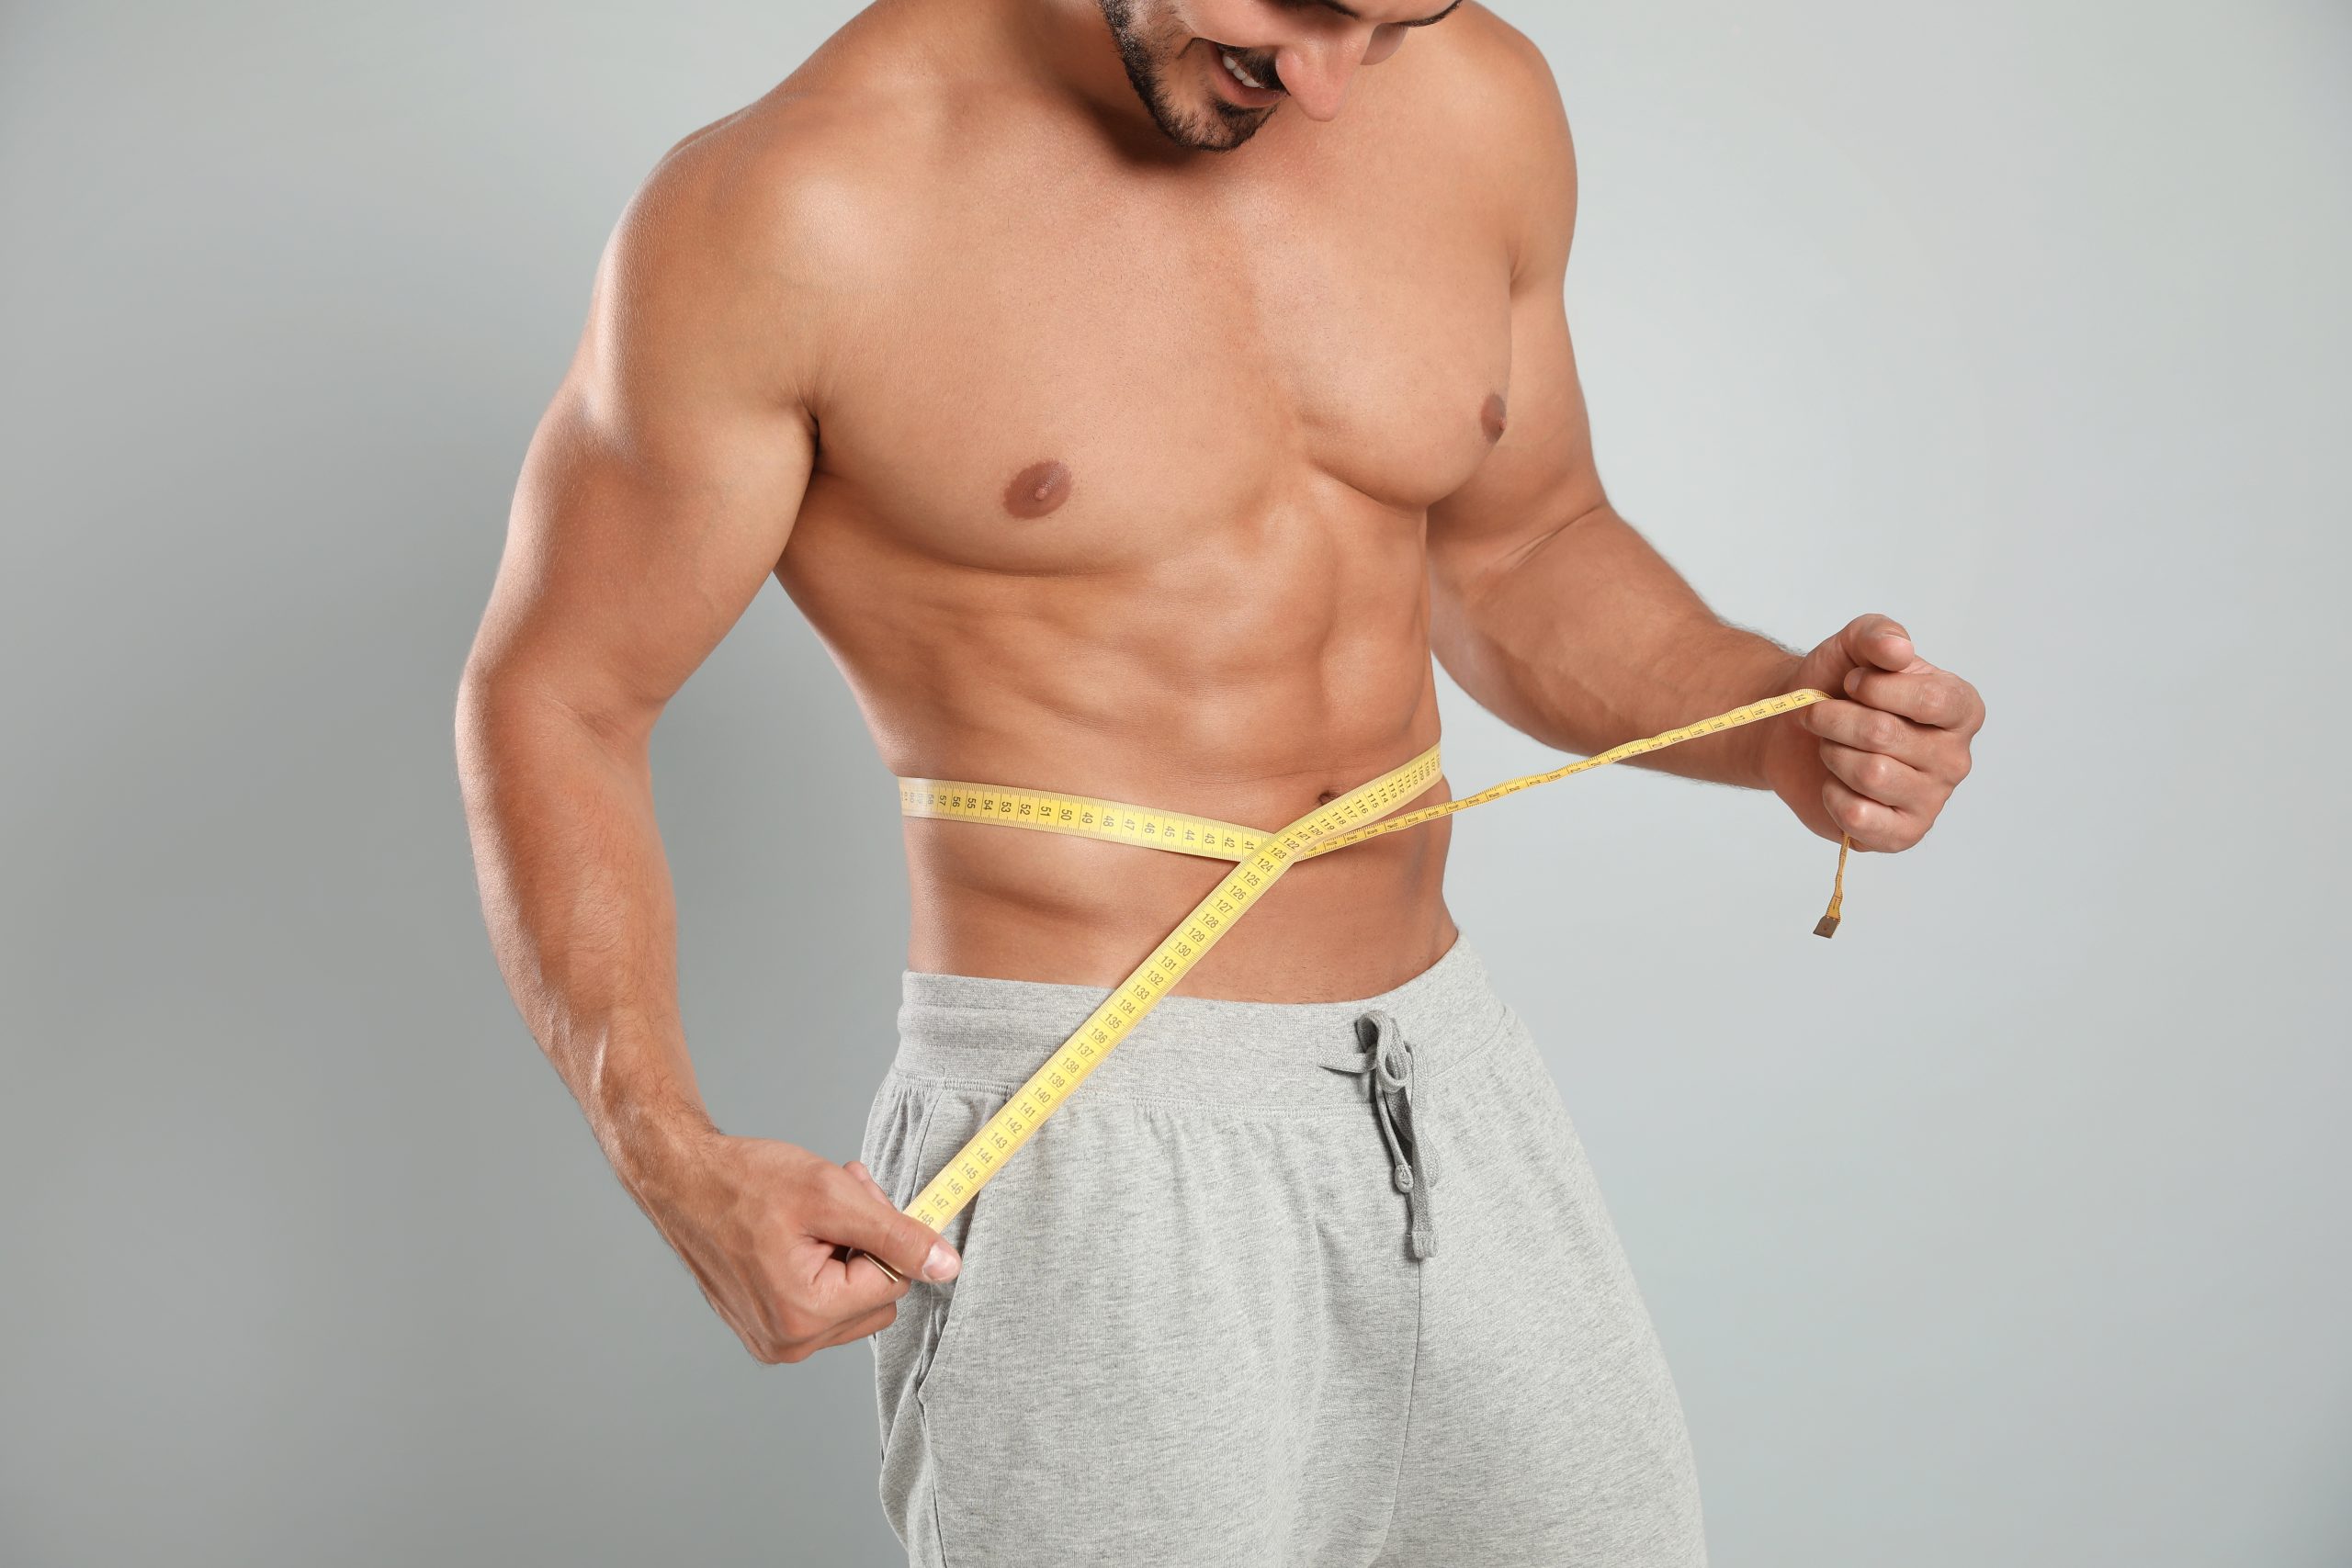 Young man with slim body using measuring tape on grey background, closeup view